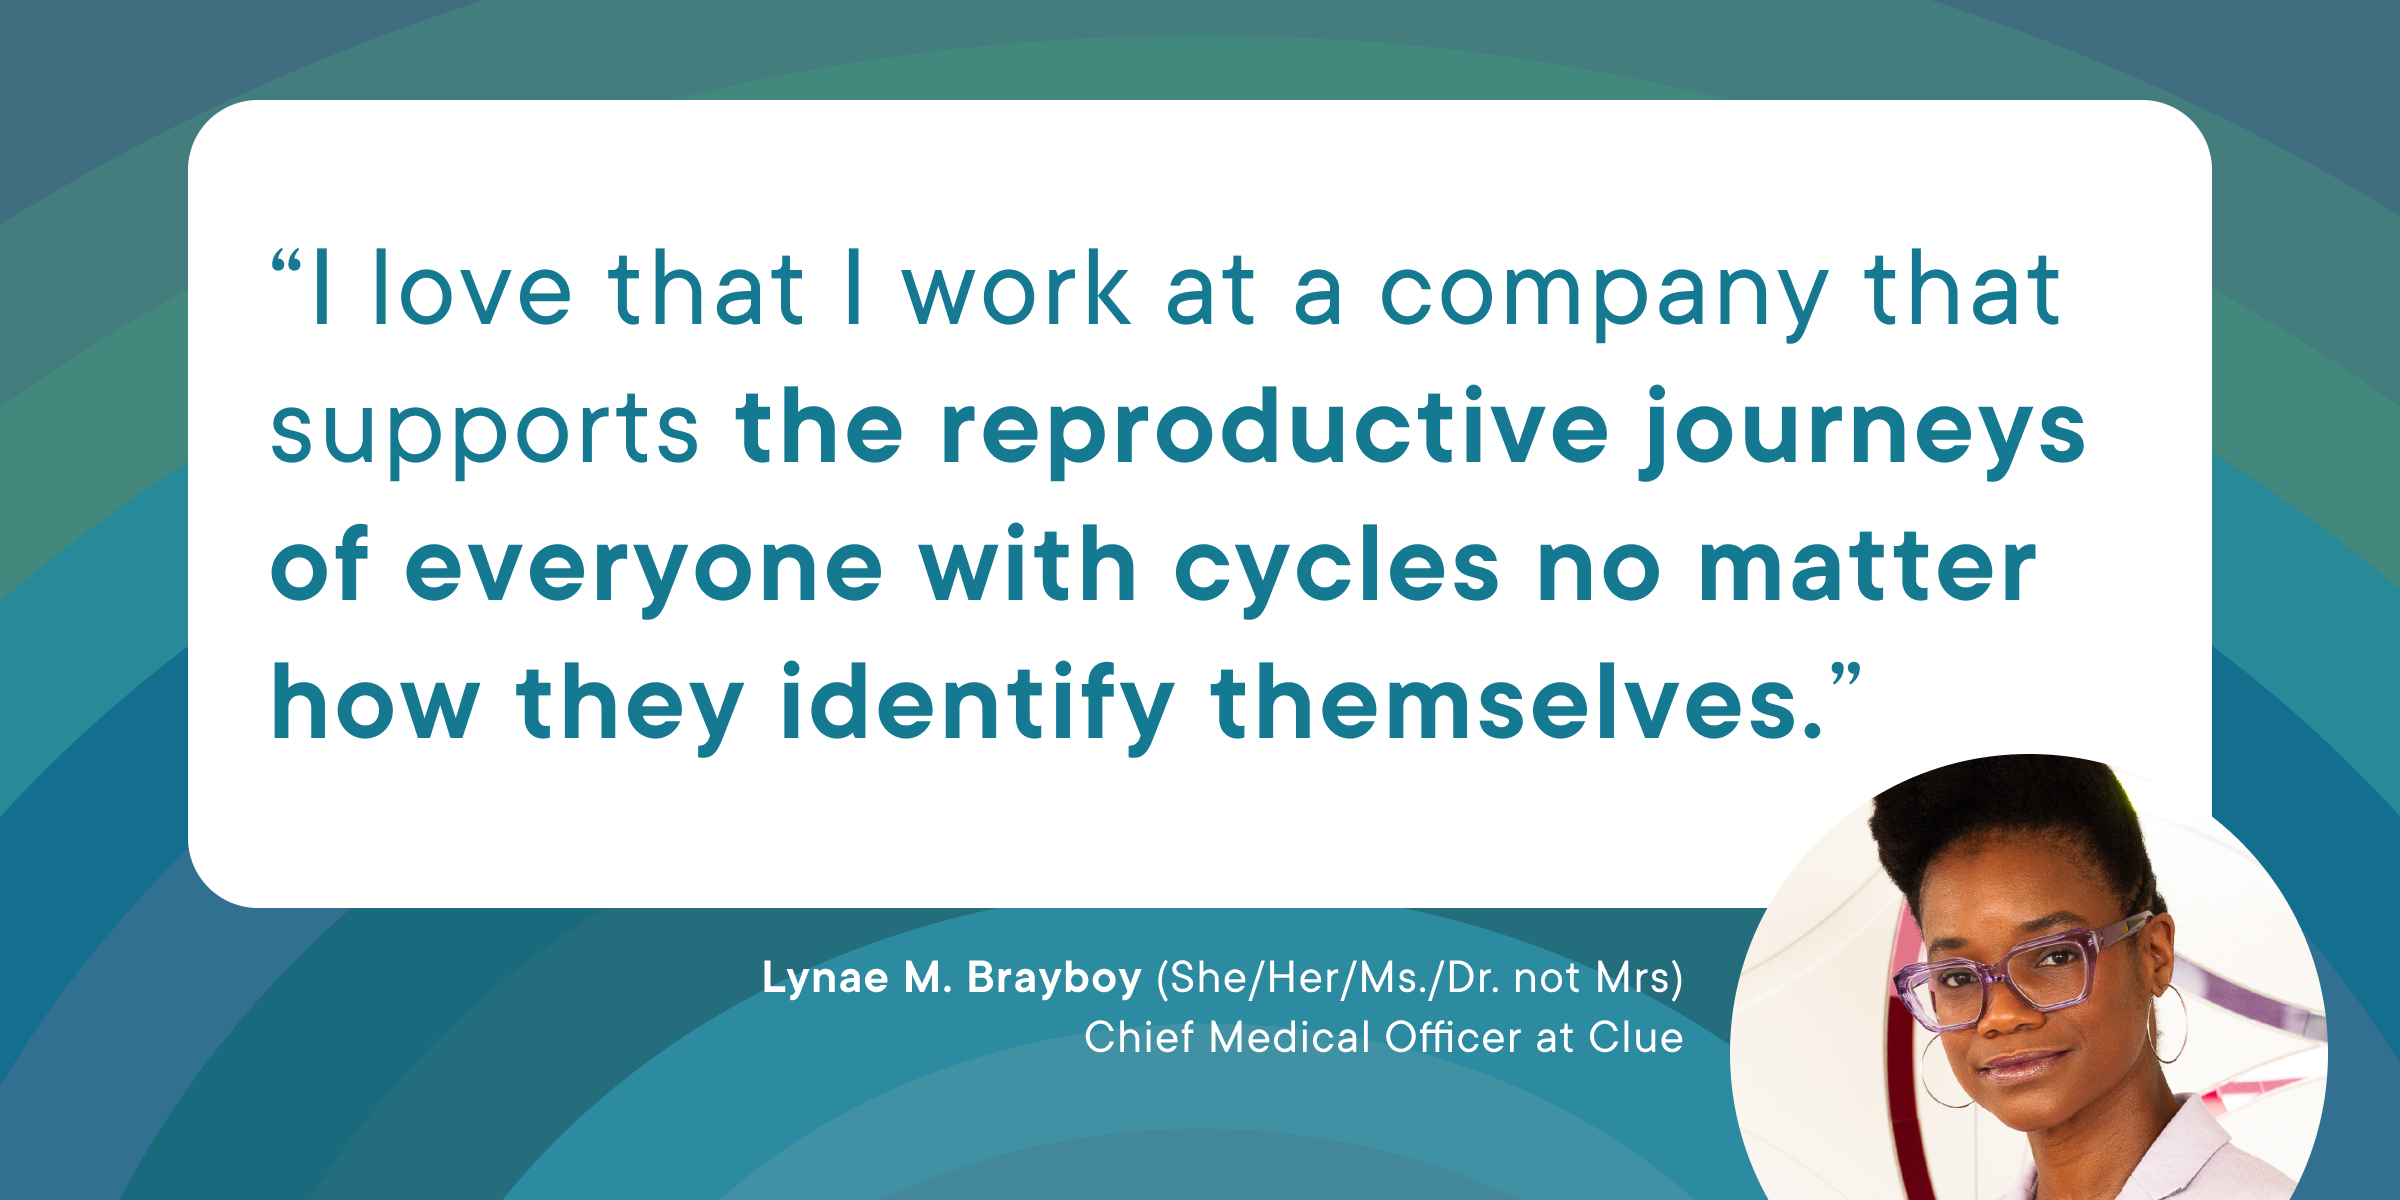 A quote from Clue employee Lynae that reads: "I love that I work at a company that supports the reproductive journey of everyone with cycles no matter how they identify themselves."